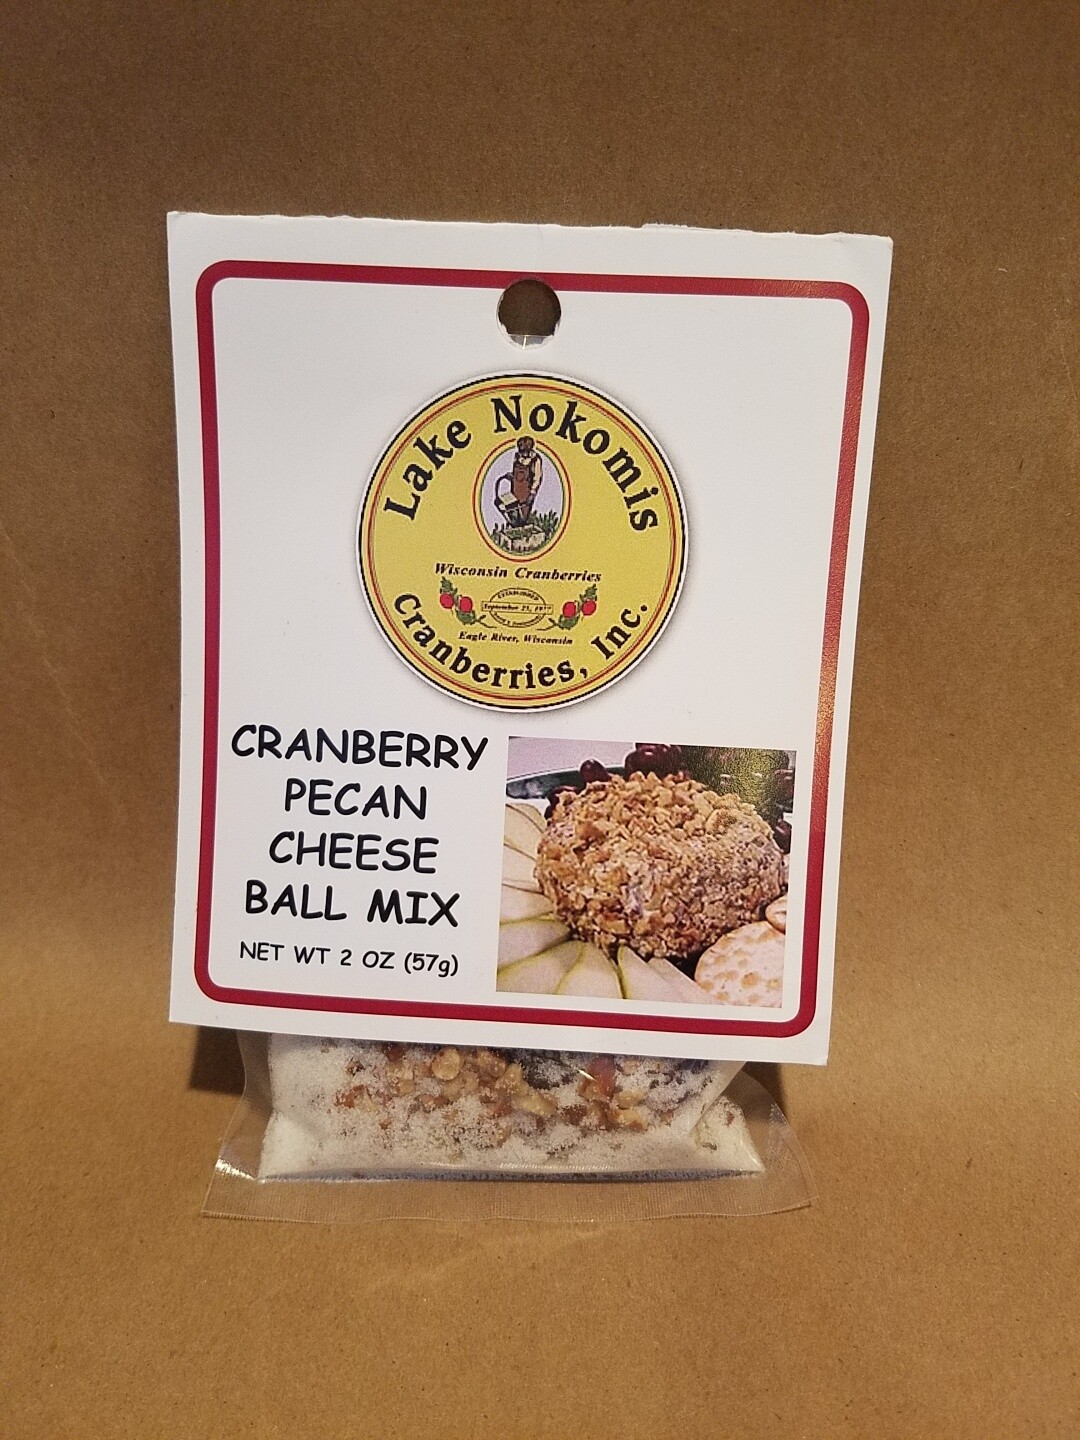 Cranberry Pecan Cheese Ball Mix LNC label